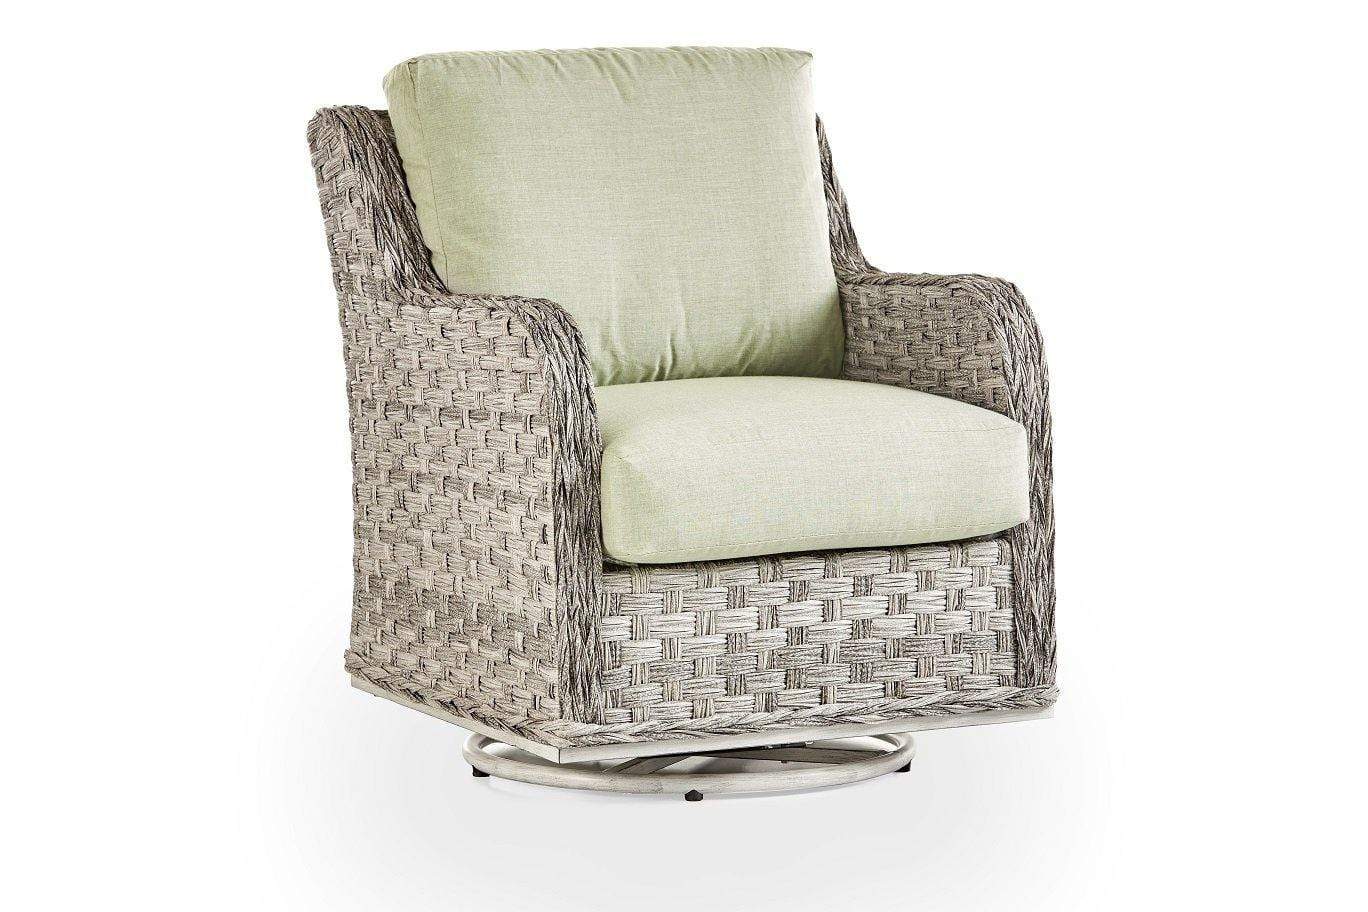 South Sea Outdoor Living Patio Furniture Grand Isle Swivel Glider by South Sea Outdoor Living - 77405